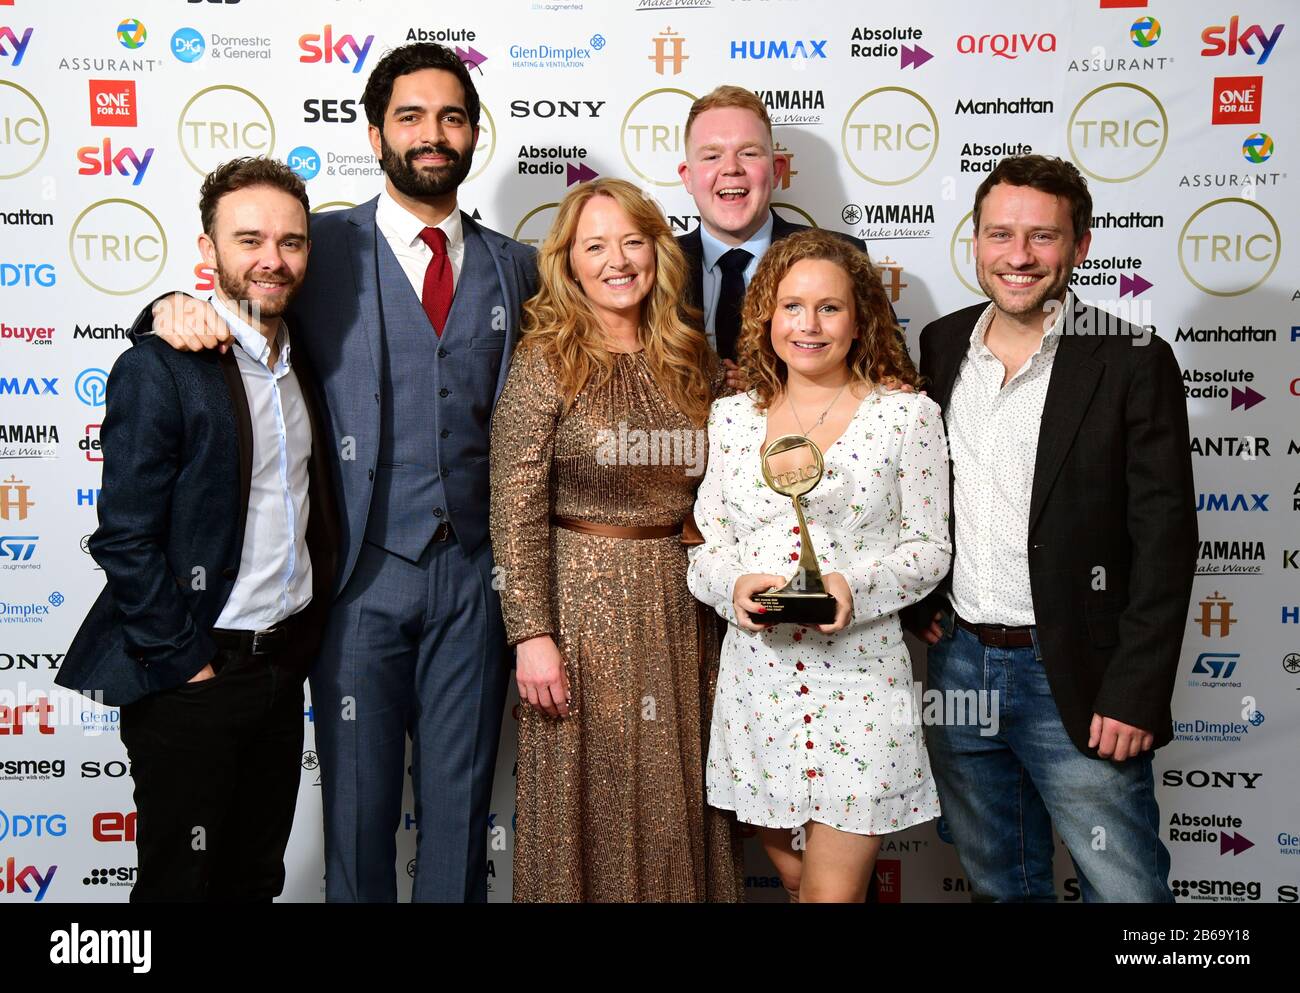 The cast of Coronation Street with the award for Soap of the Year Sponsored by Assurant. Jack P. Shepherd, Charlie De Melo, Sally Ann Matthews, Dolly-Rose Campbell, Colson Smith and Peter Ash (left to right) attending the TRIC Awards 2020 held at the Grosvenor Hotel, London. Stock Photo